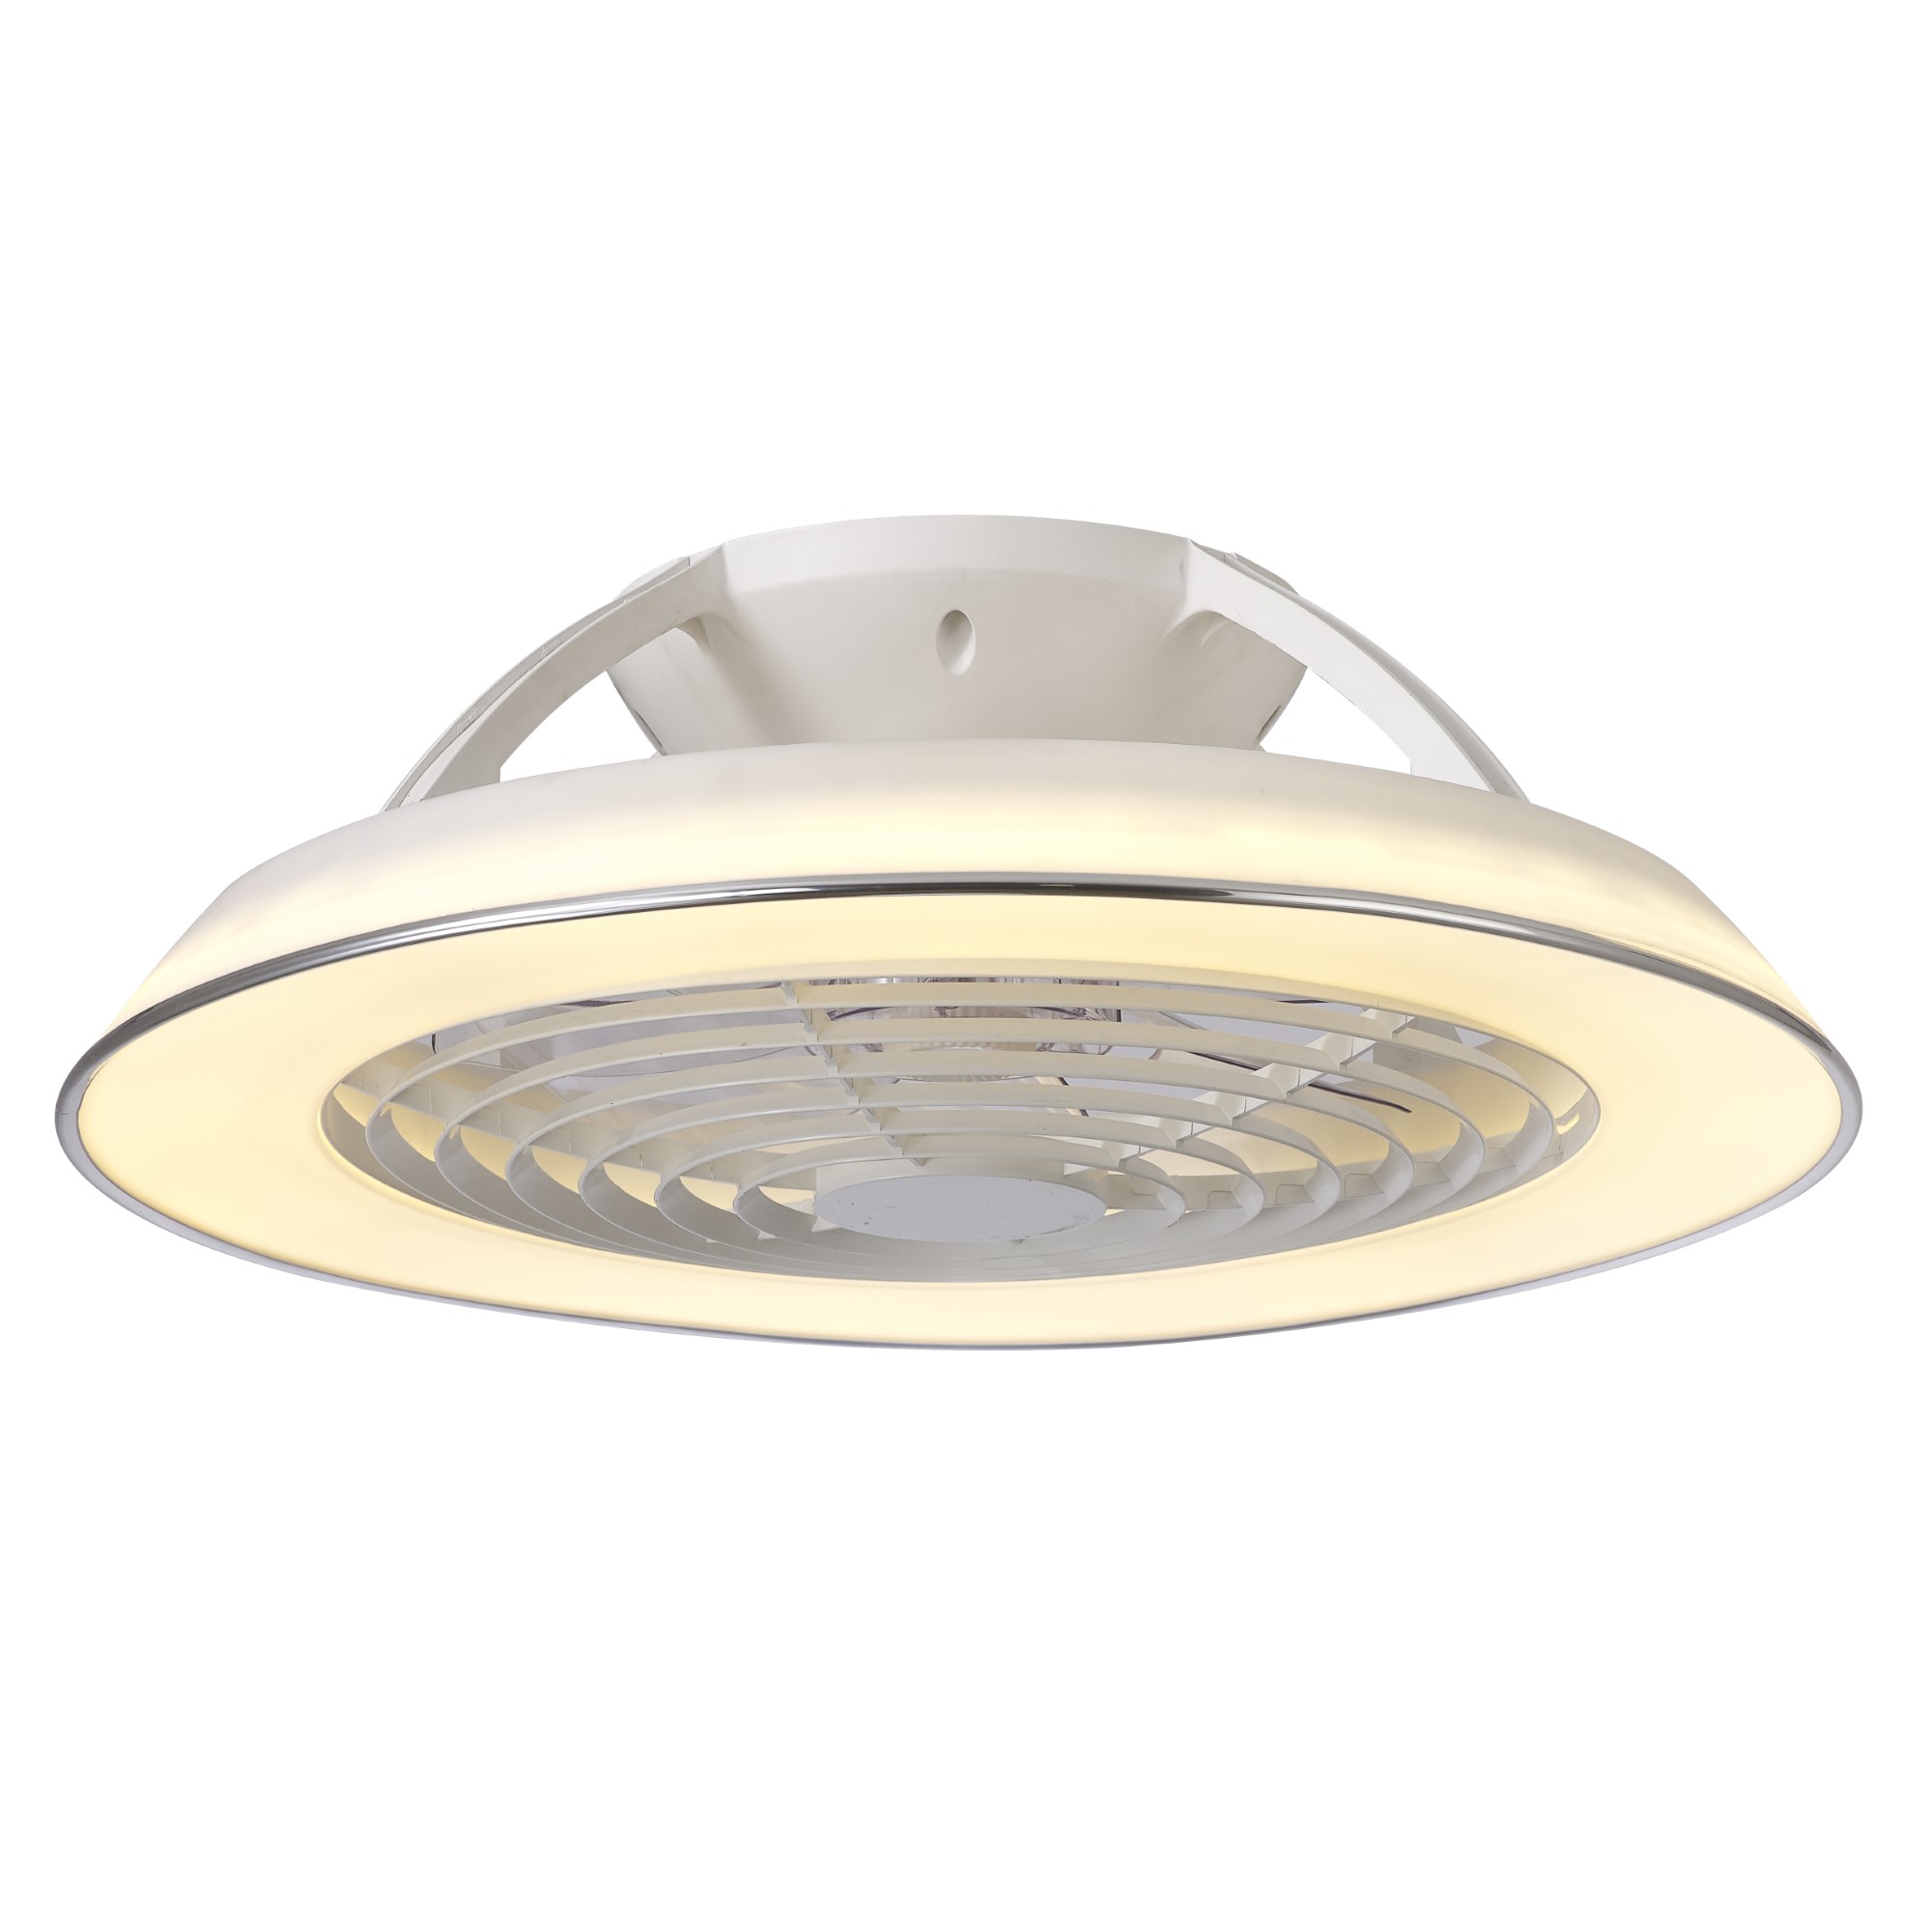 M7842  Samoa 70W LED Dimmable Ceiling Light & Fan, Remote Controlled White